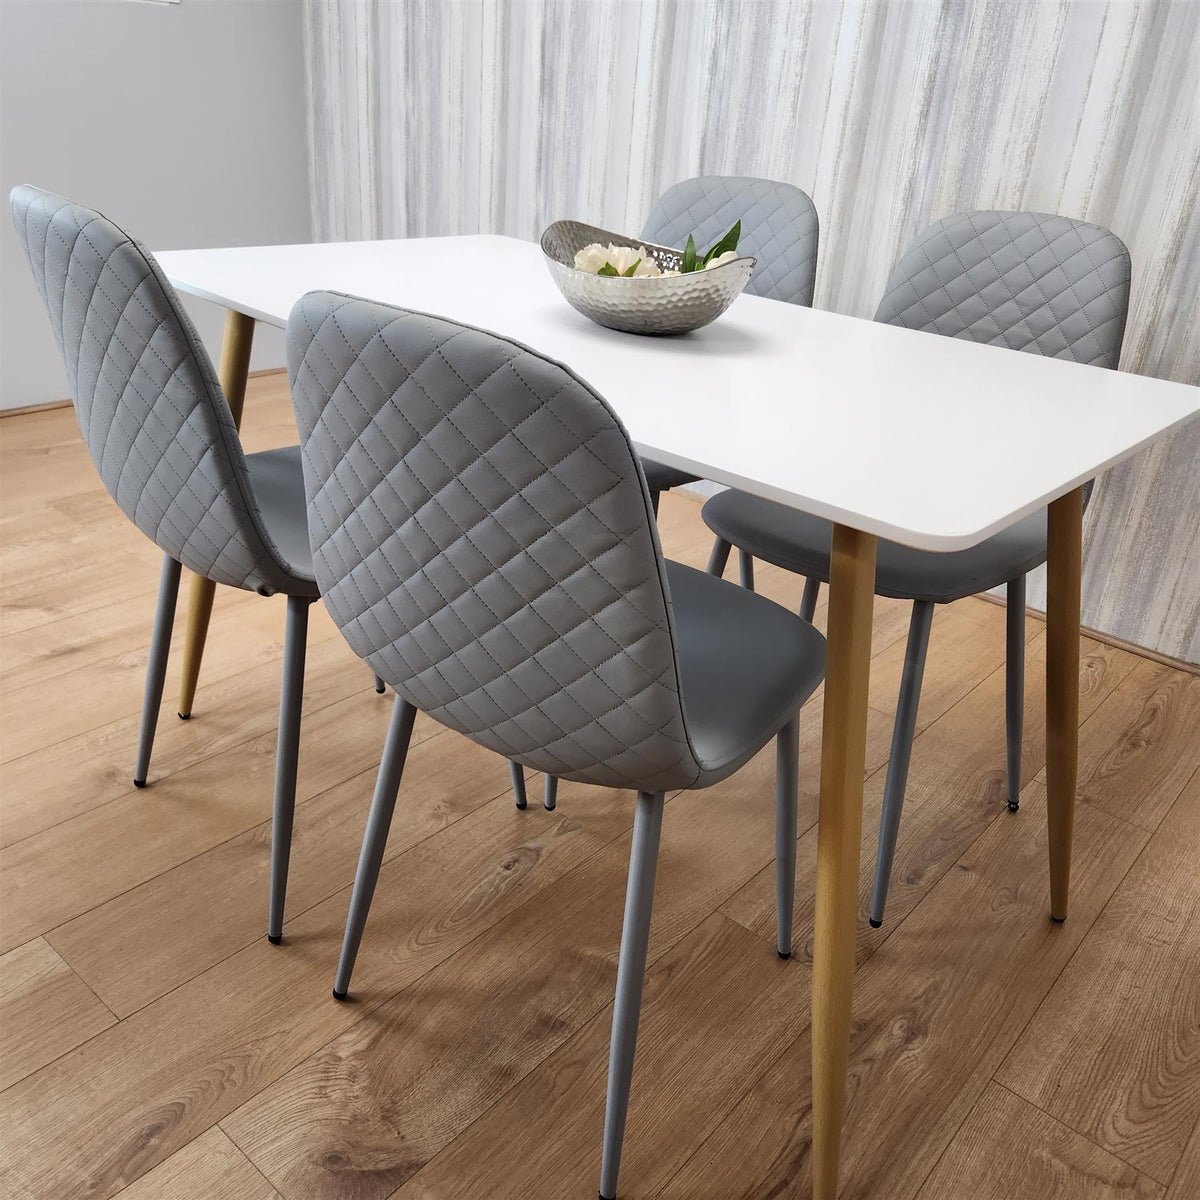 Wooden Dining Table with 4 Grey Gem Patterned Chairs White Table with Grey Chairs